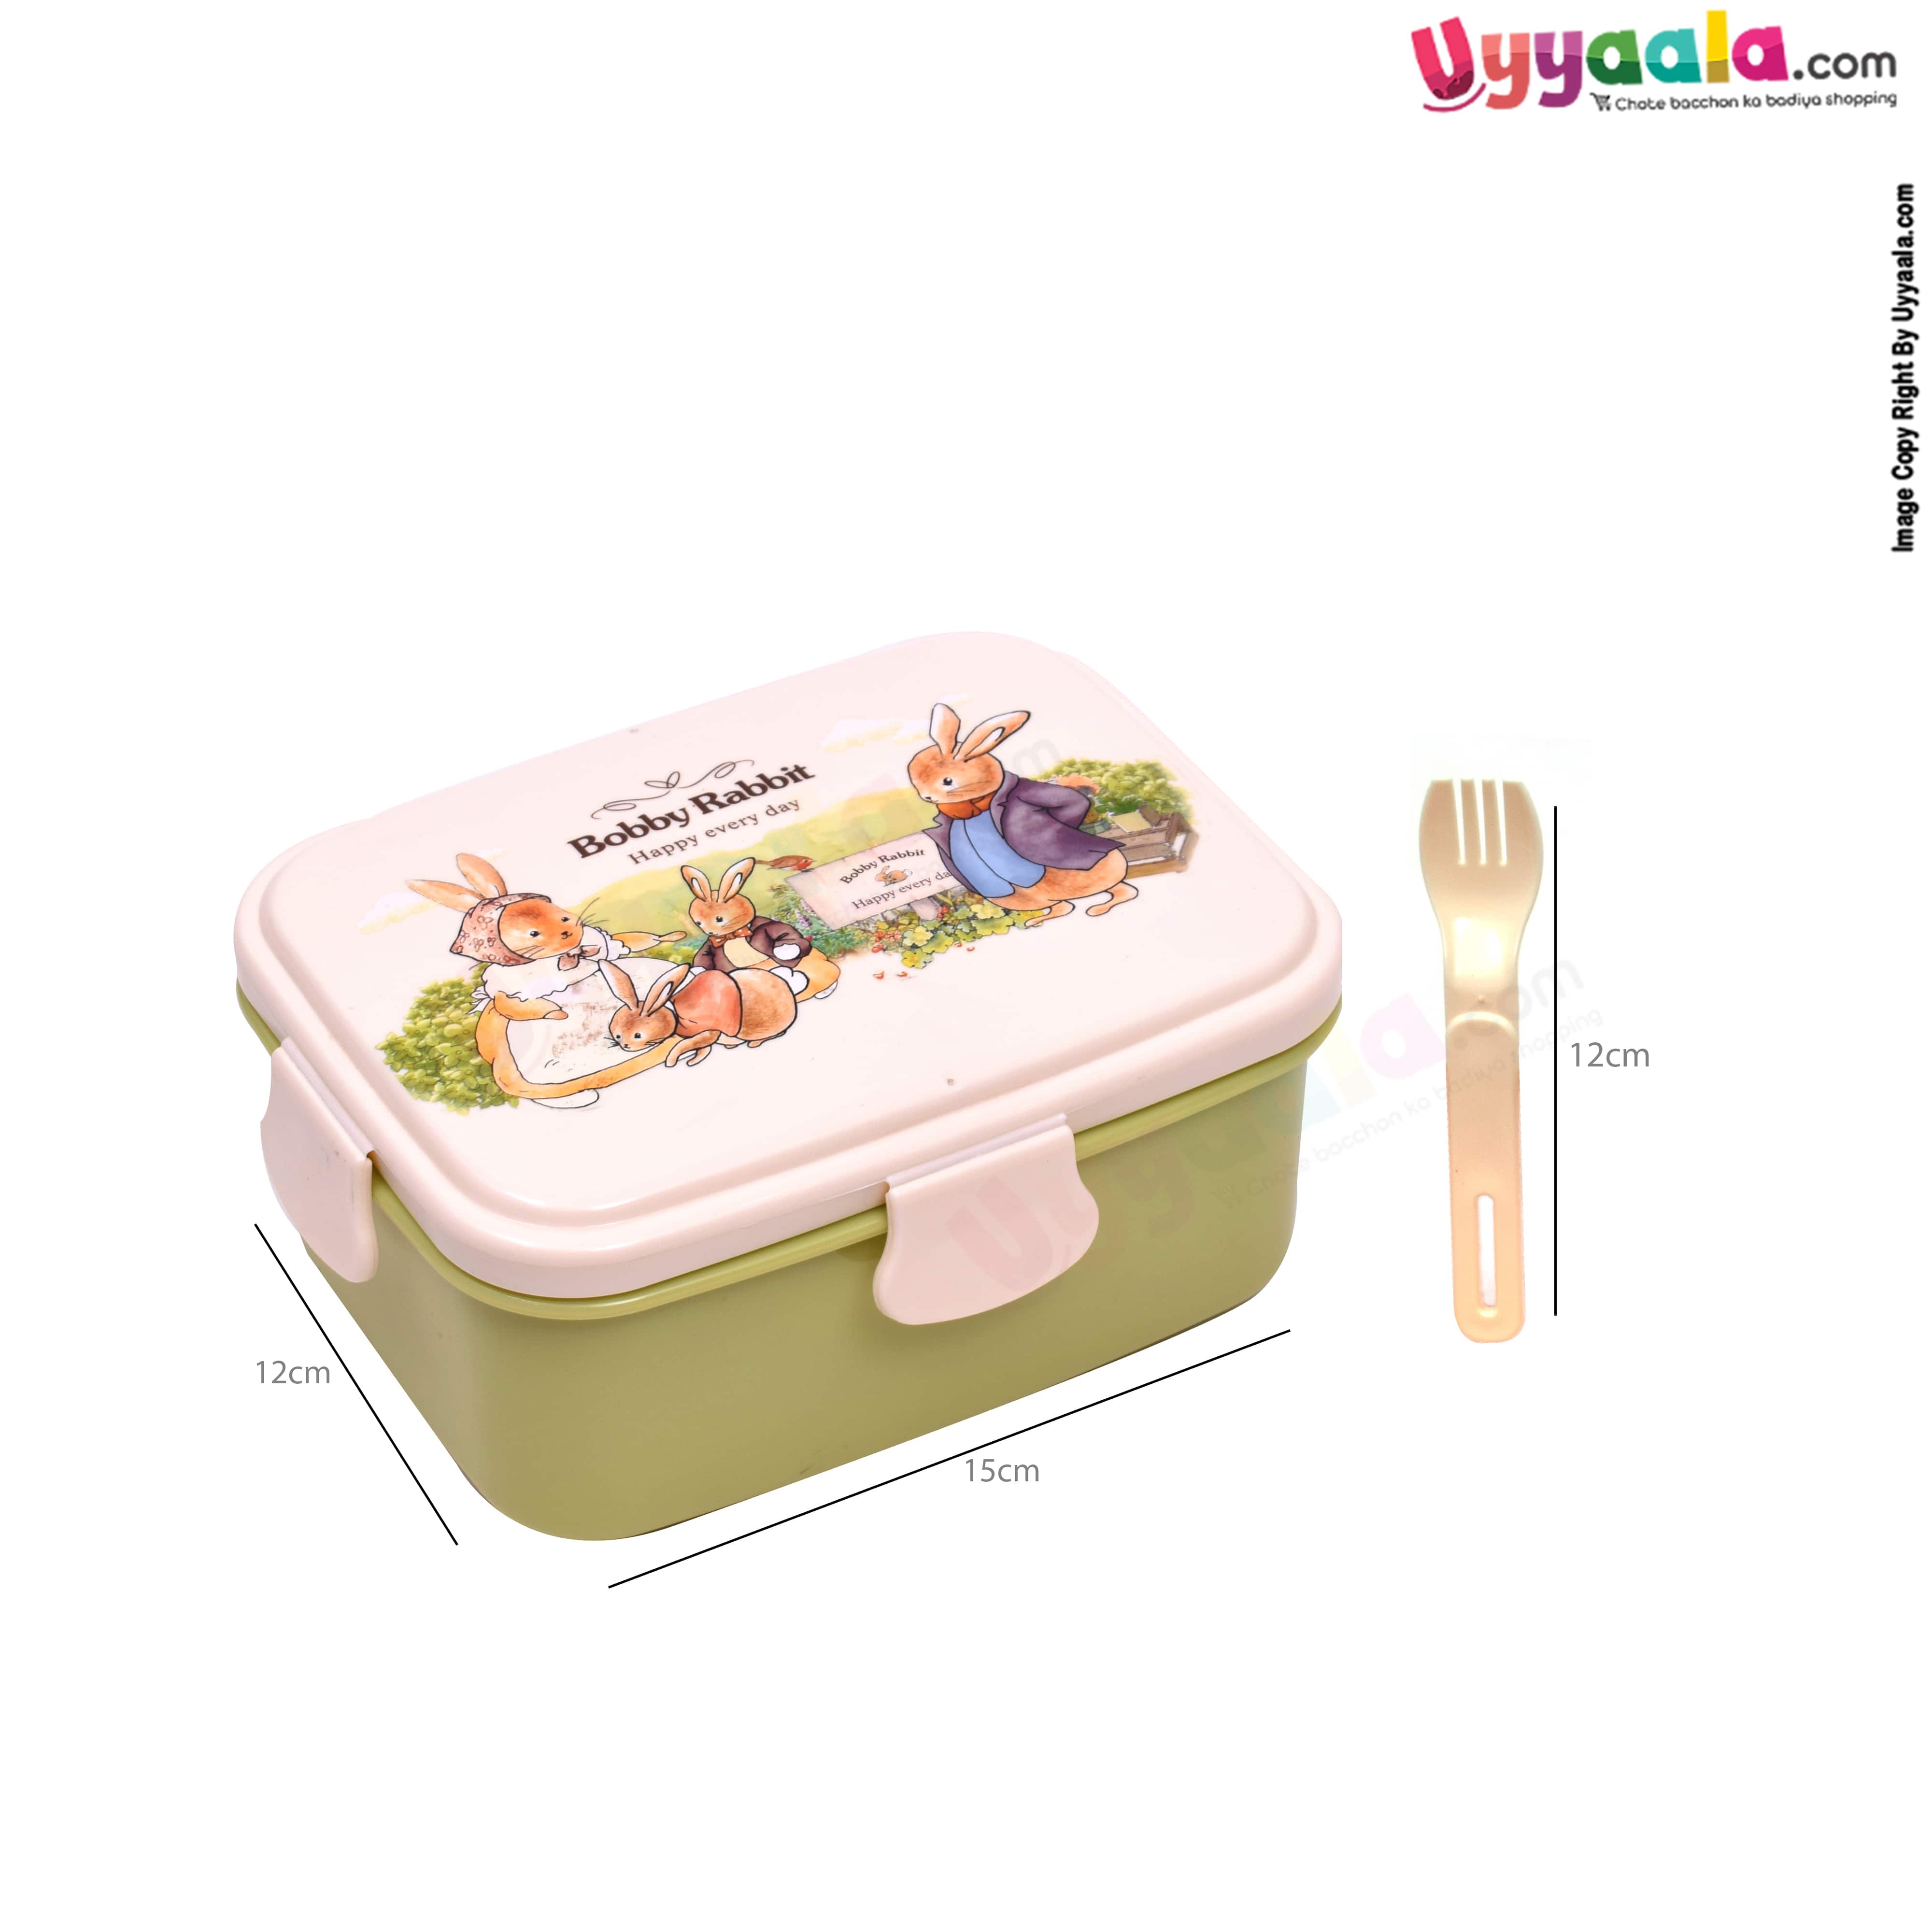 Lunch box for kids